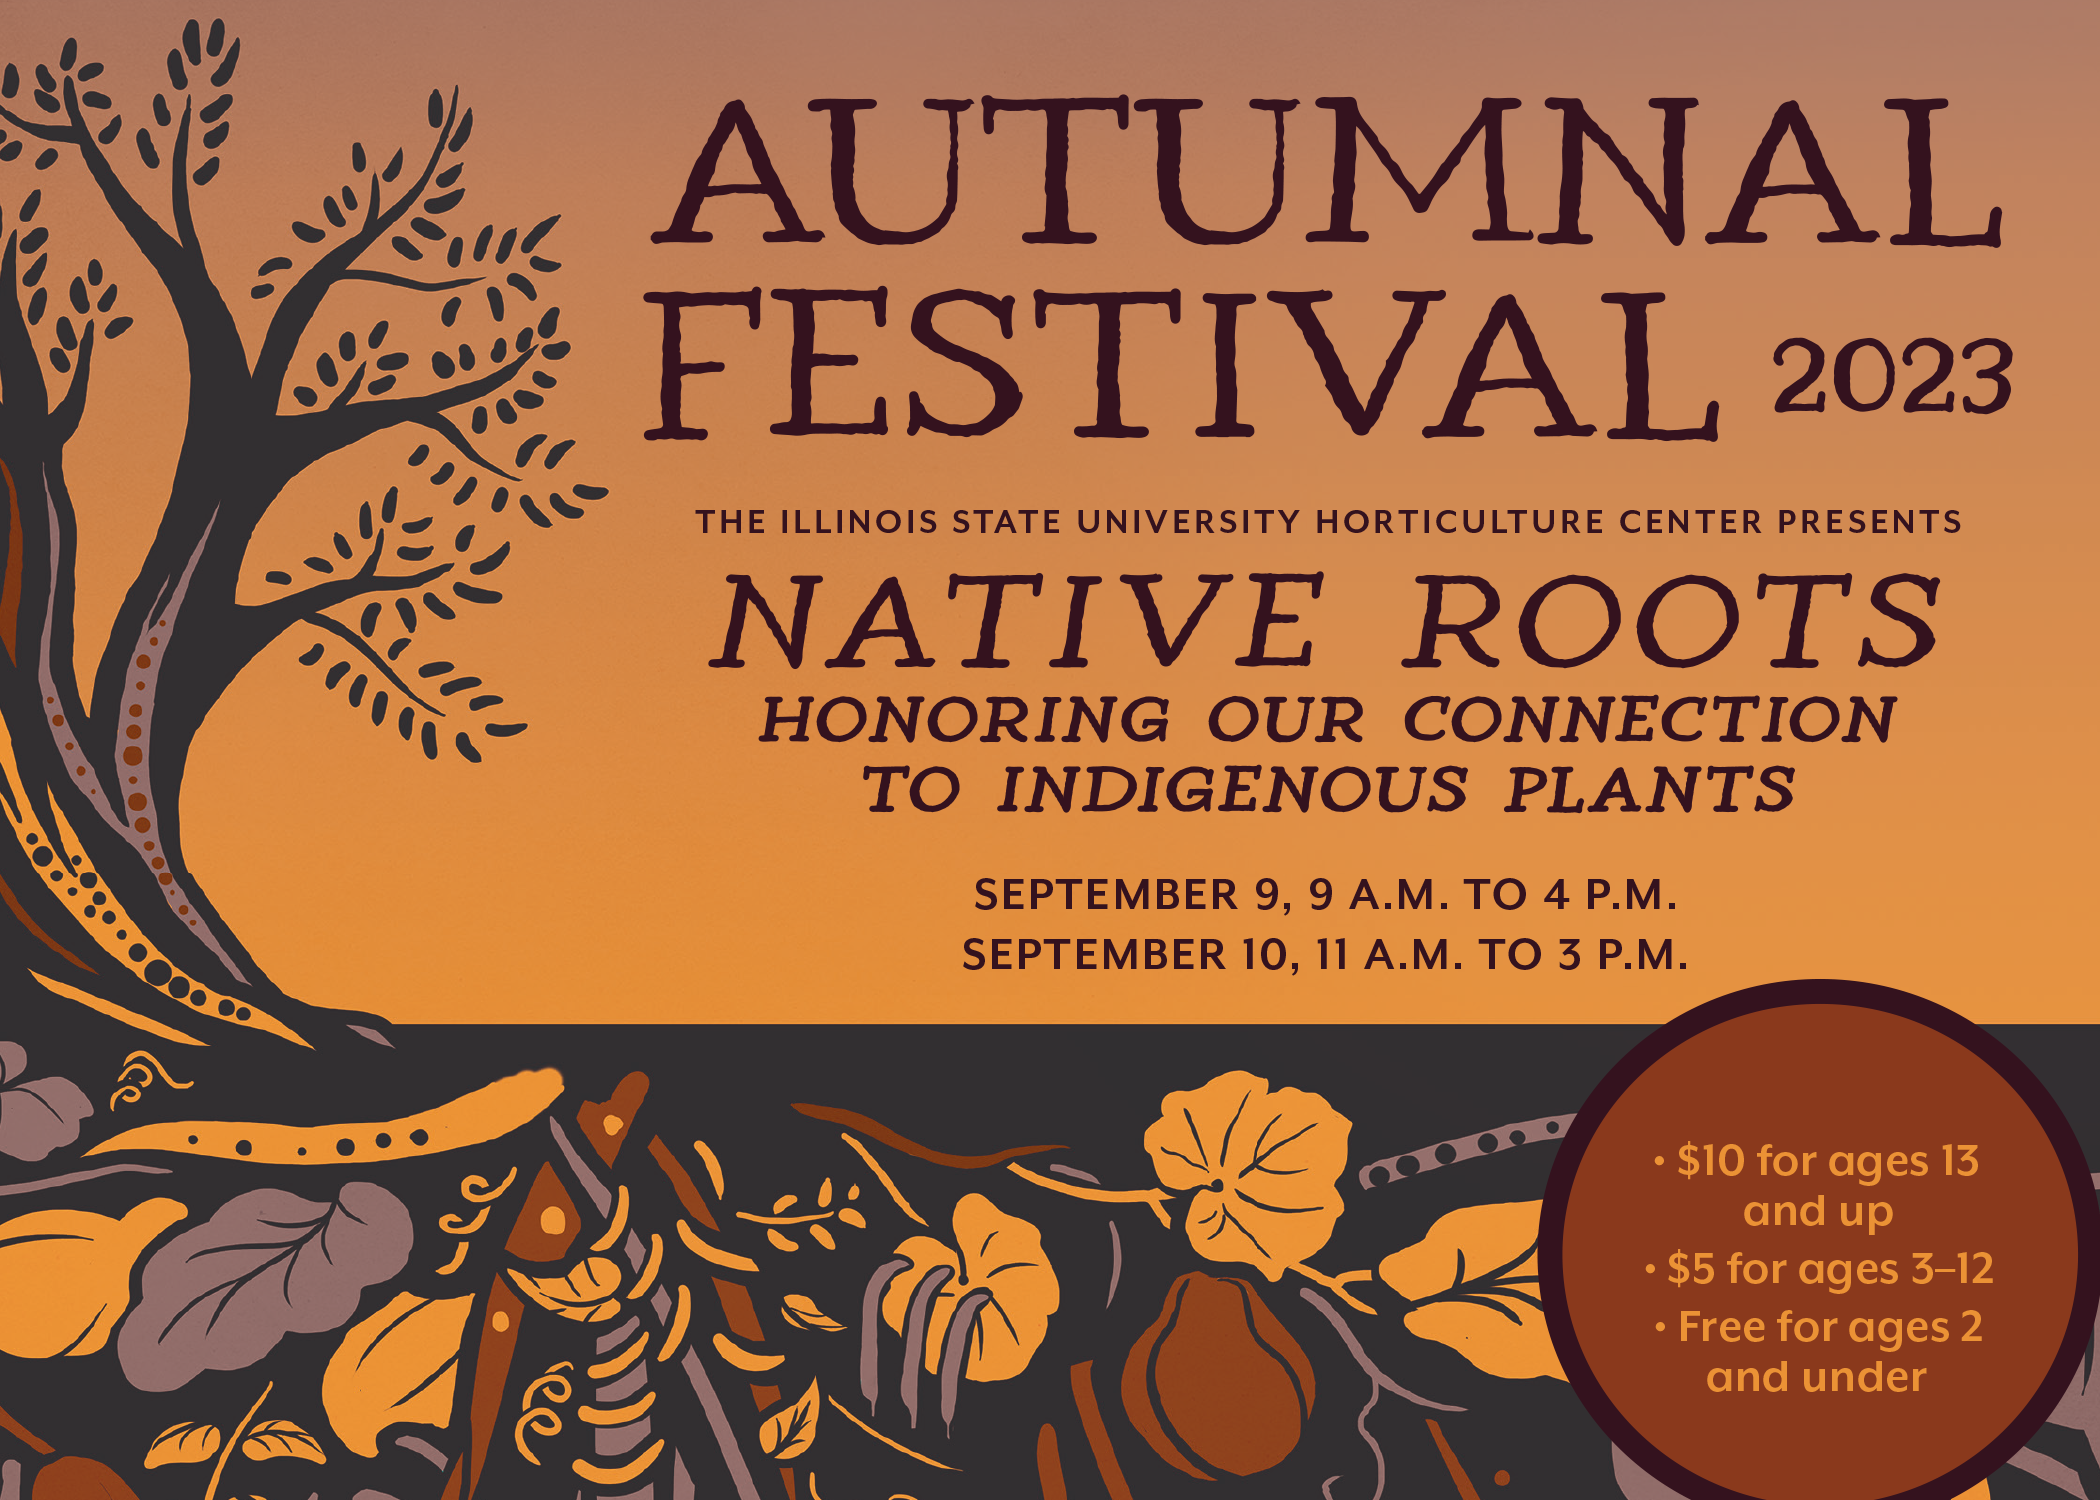 Autumnal Festival - The Illinois State University Horticulture Center Presents: Native Roots Native Roots - Honoring Our Connection to Indigenous Plants